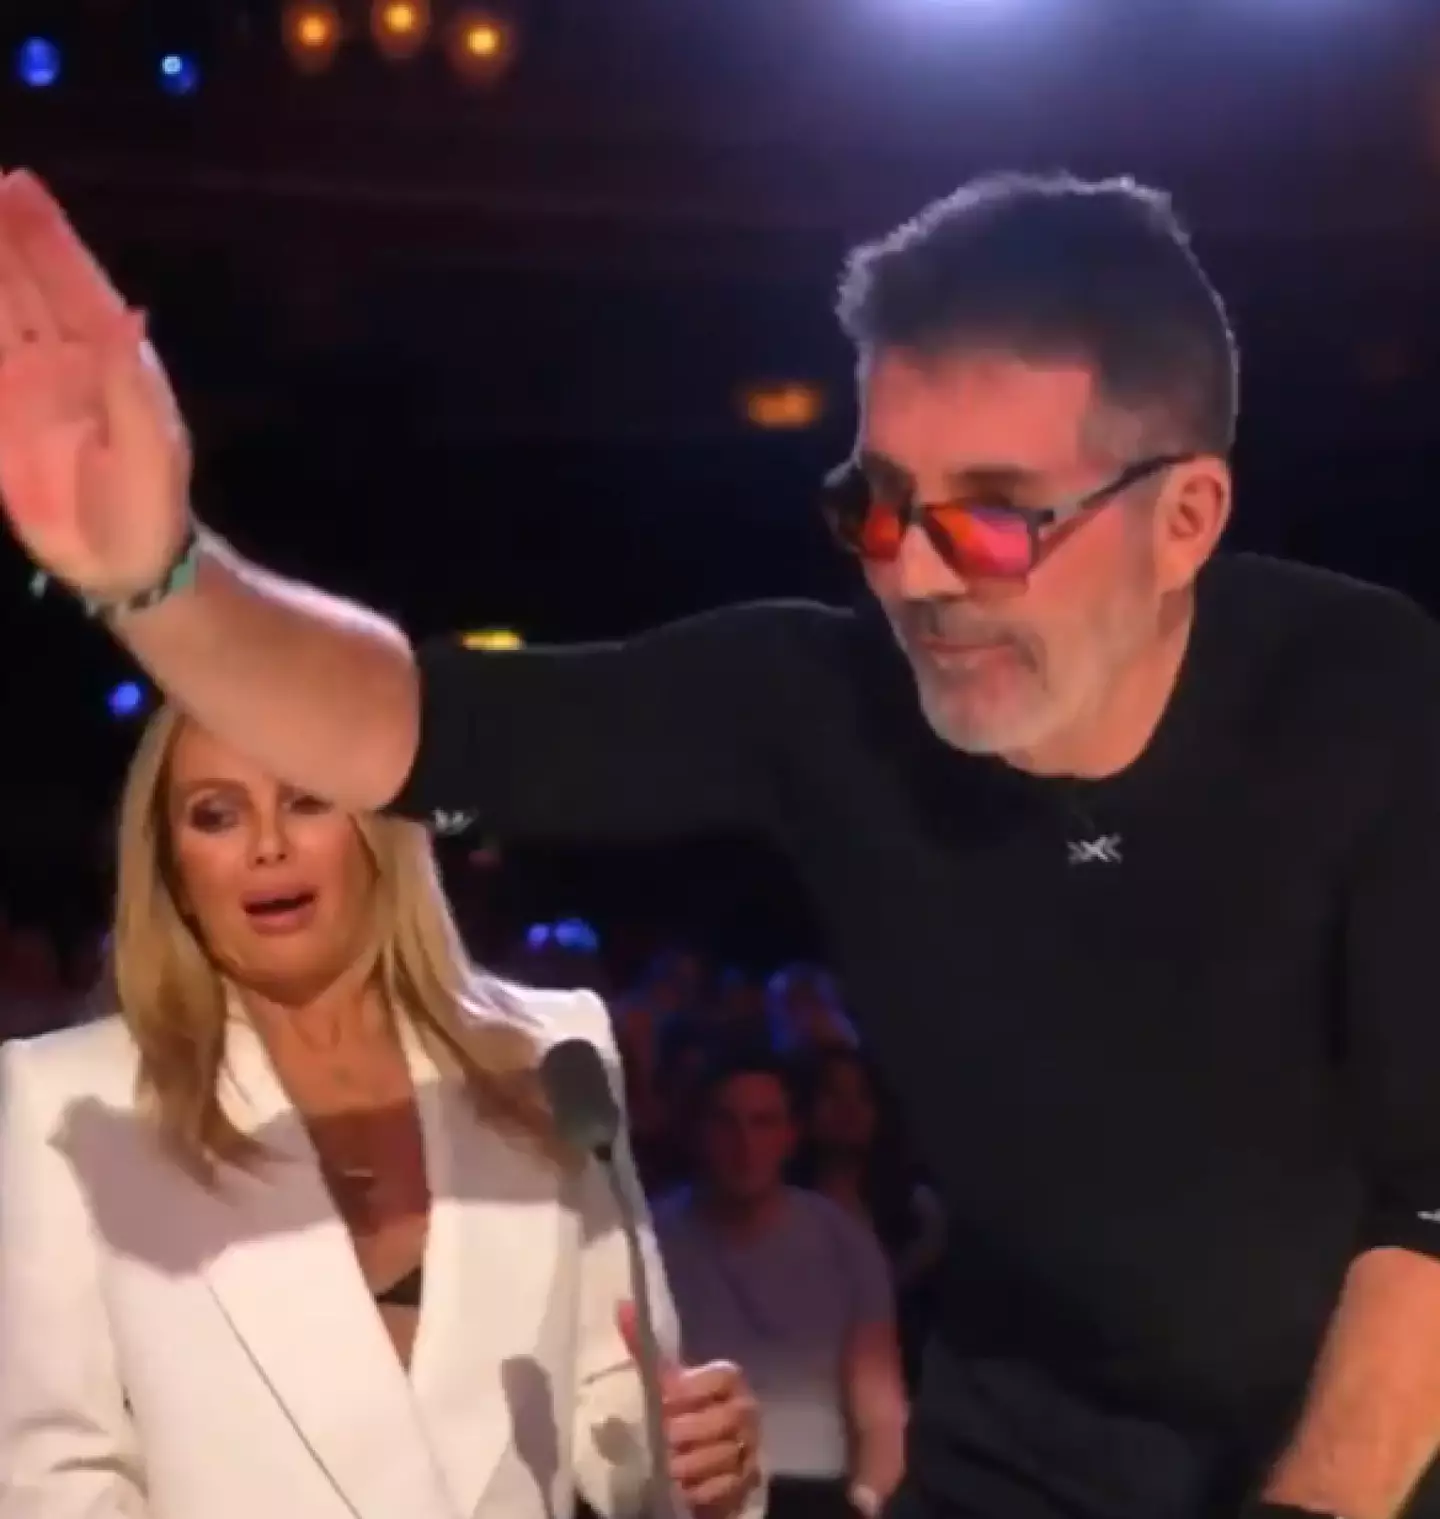 Cowell hit the golden button for the dance group. (ITV)